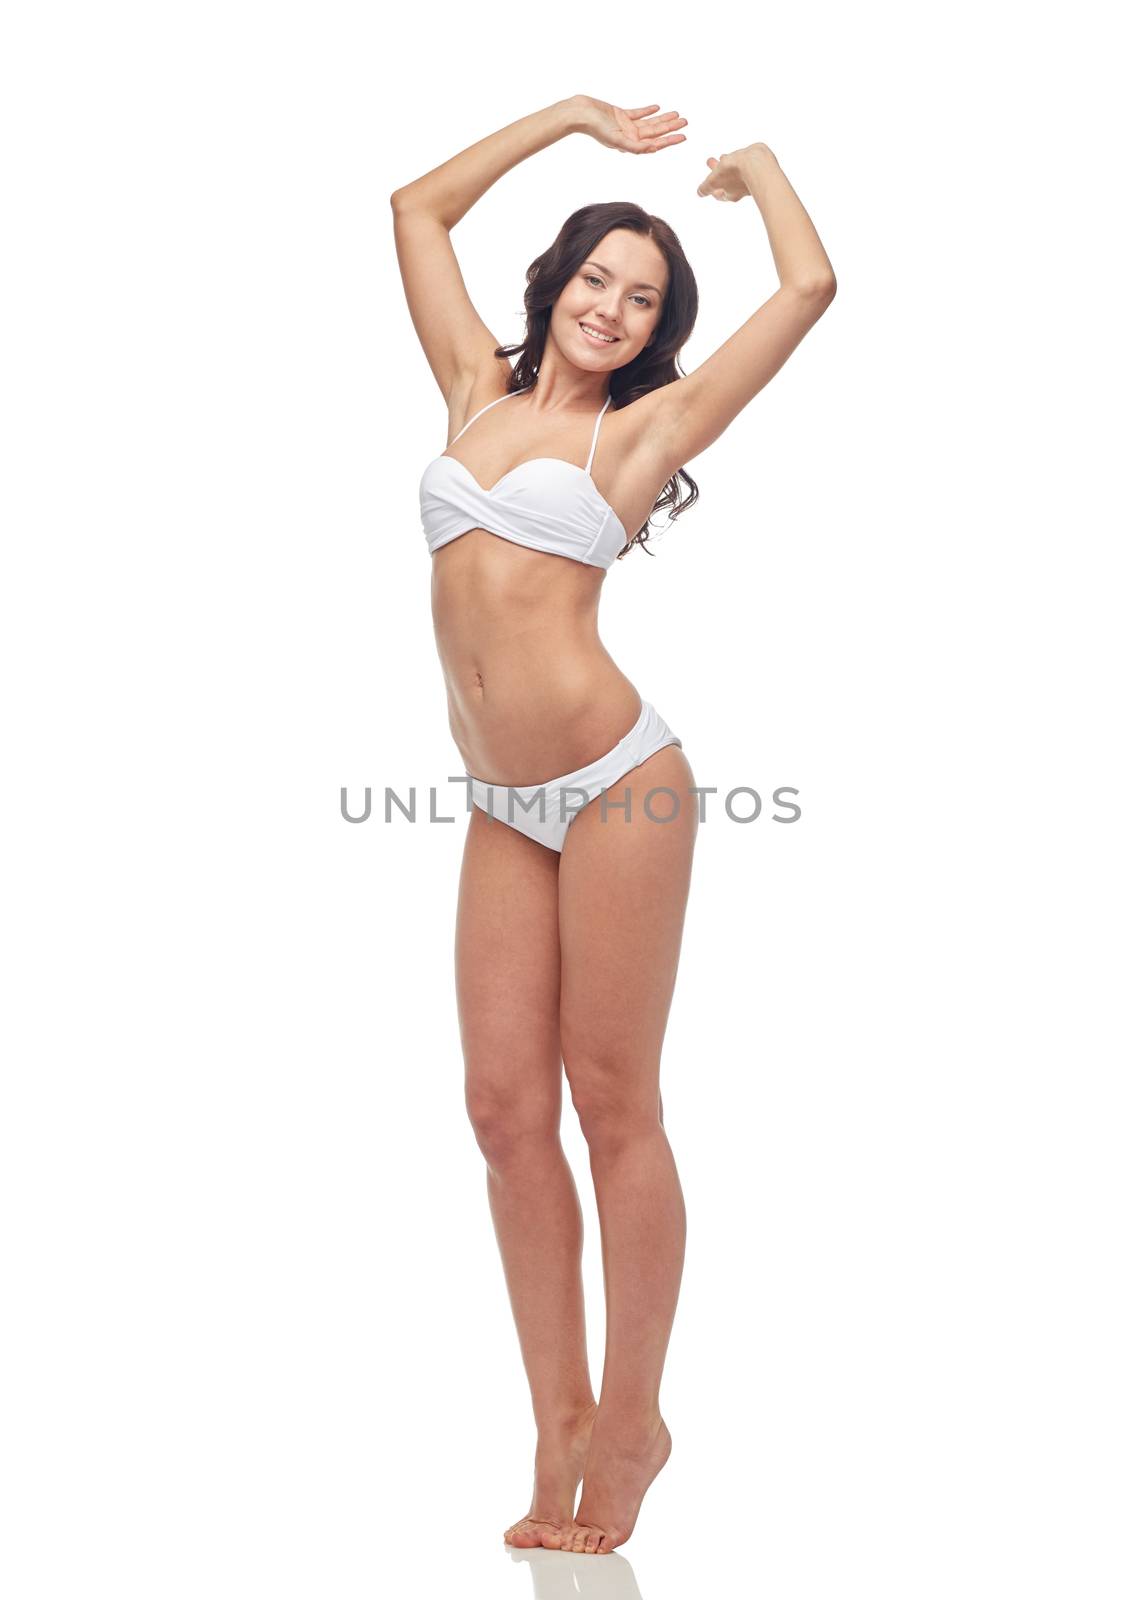 people, fashion, swimwear, summer and beach concept - happy young woman posing in white bikini swimsuit with raised hands